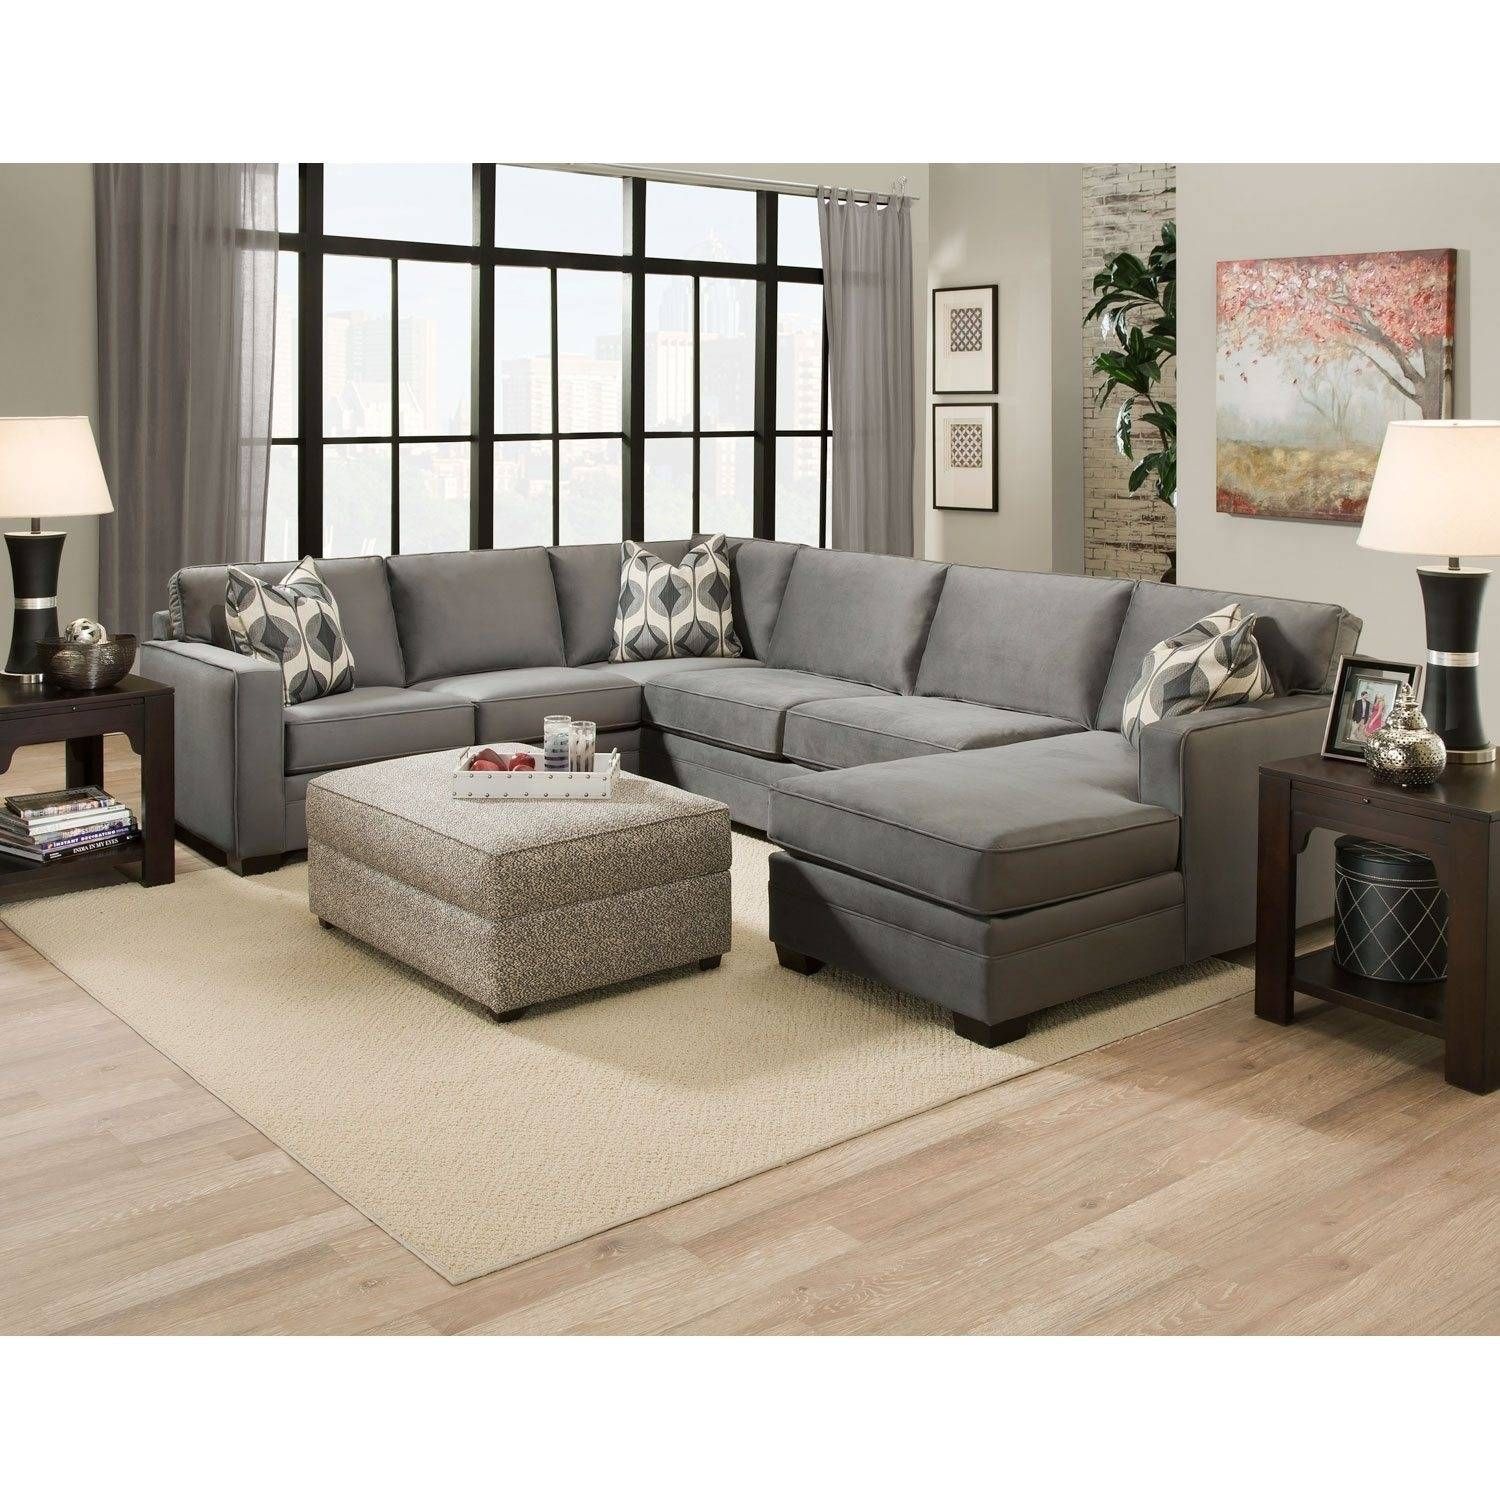 Featured Photo of 30 Ideas of Durable Sectional Sofa